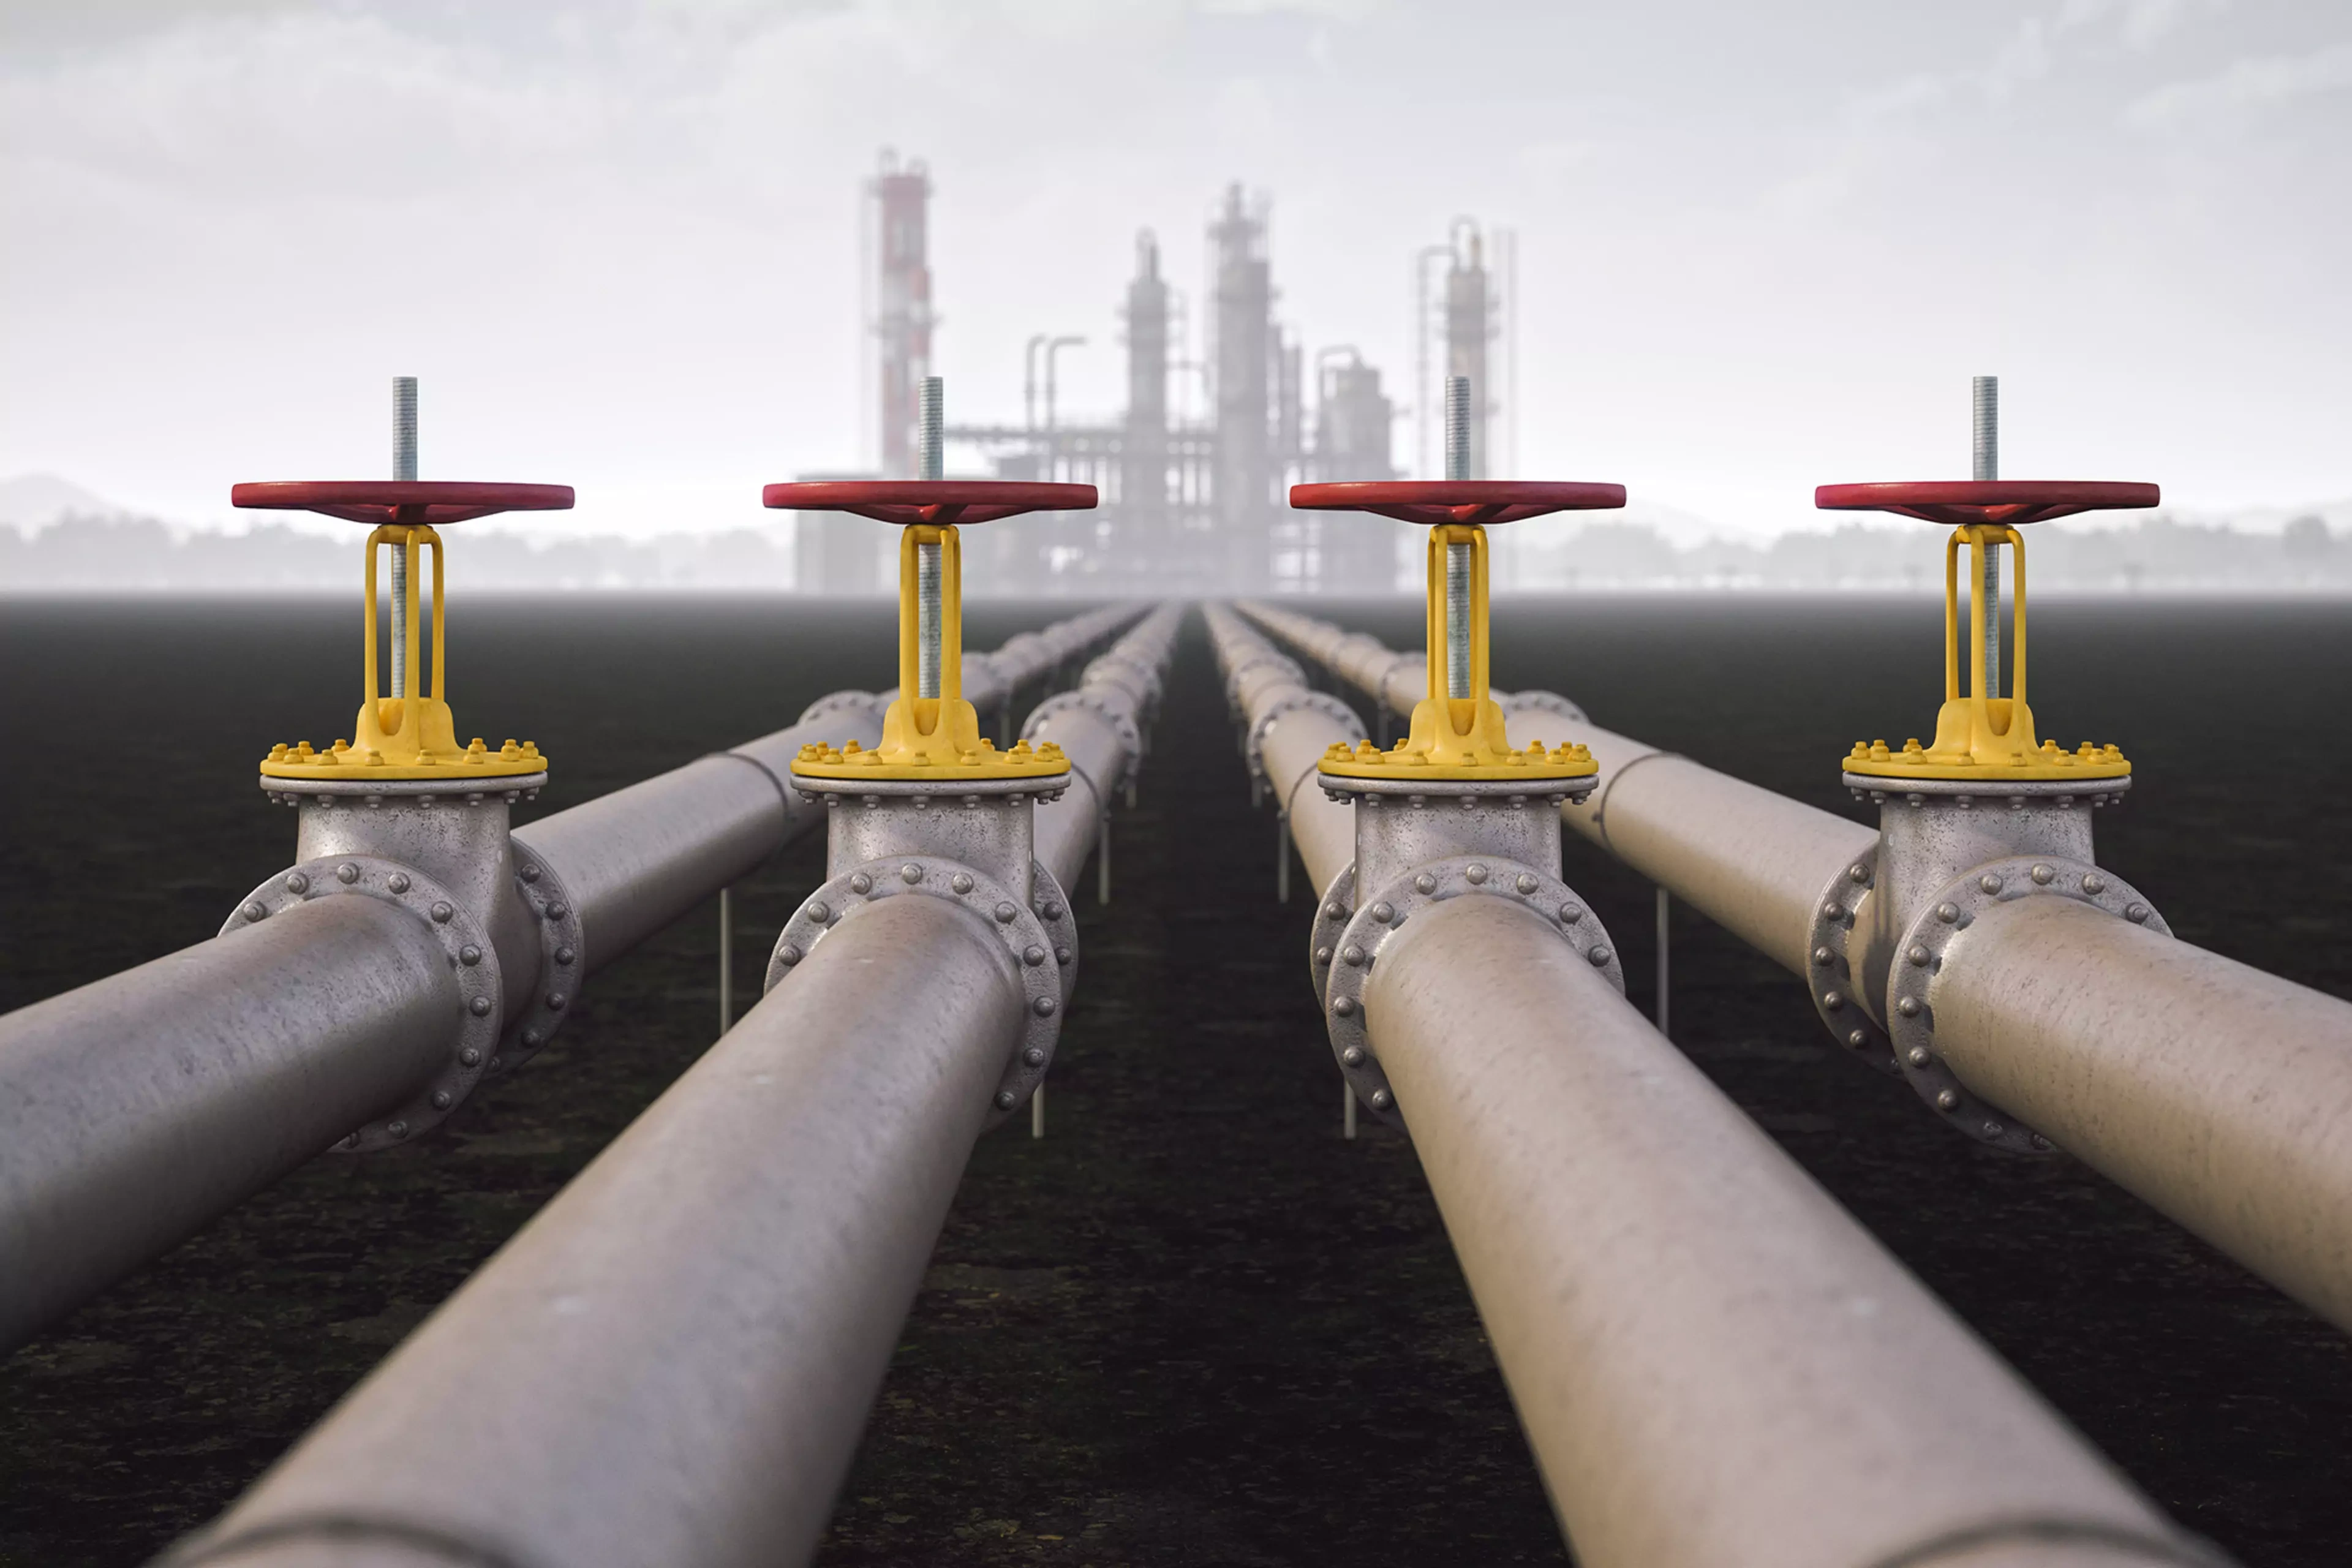 Steel oil pipelines at a refinery.